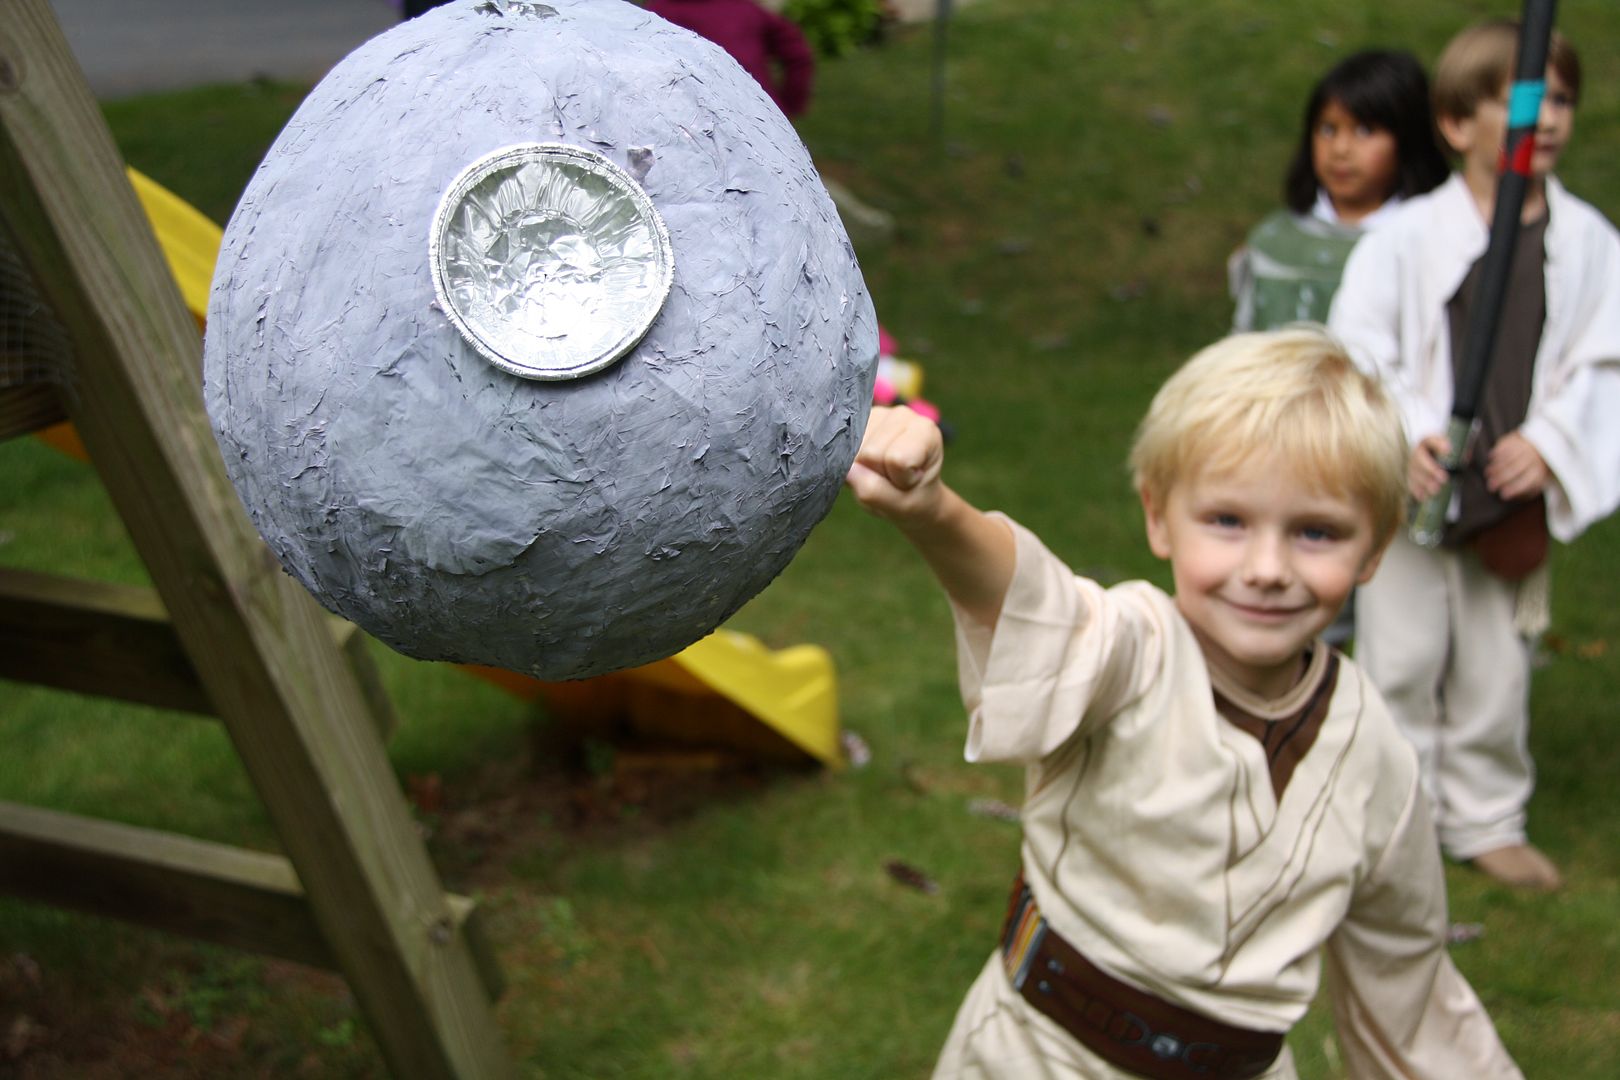 Star Wars birthday party activities: How to make an easy Death Star pinata on CoolMomPicks.com